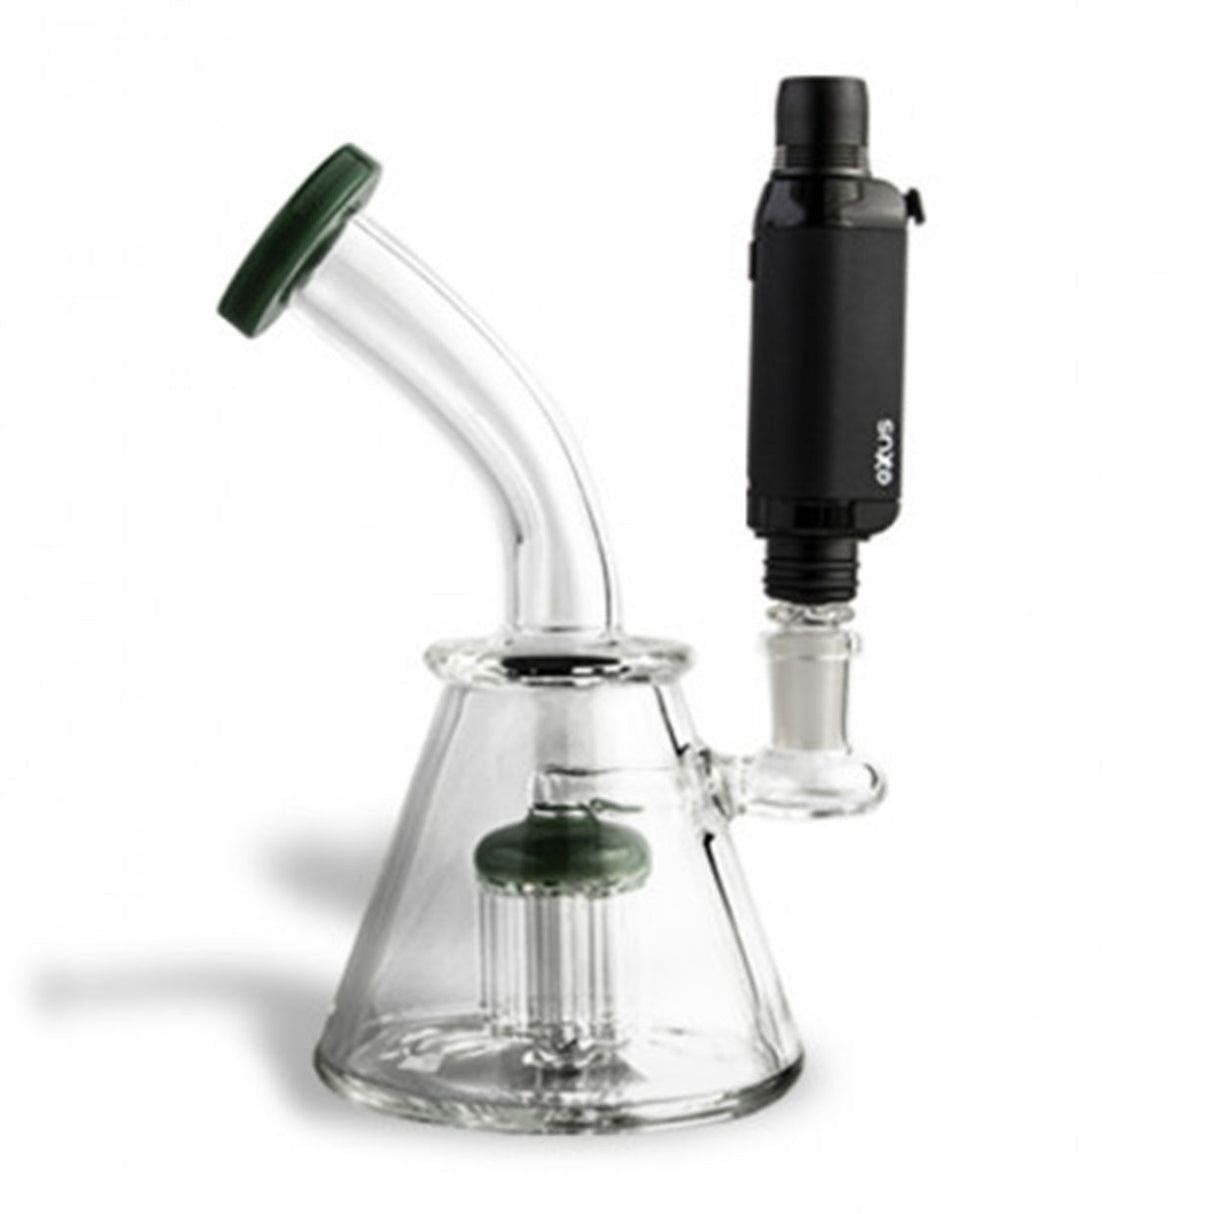 Black Exxus VRS Vaporizer Kit with Nectar Collector Mode, Dab Rig Mode, Cartridge Mode Comes with carrying pouch 16